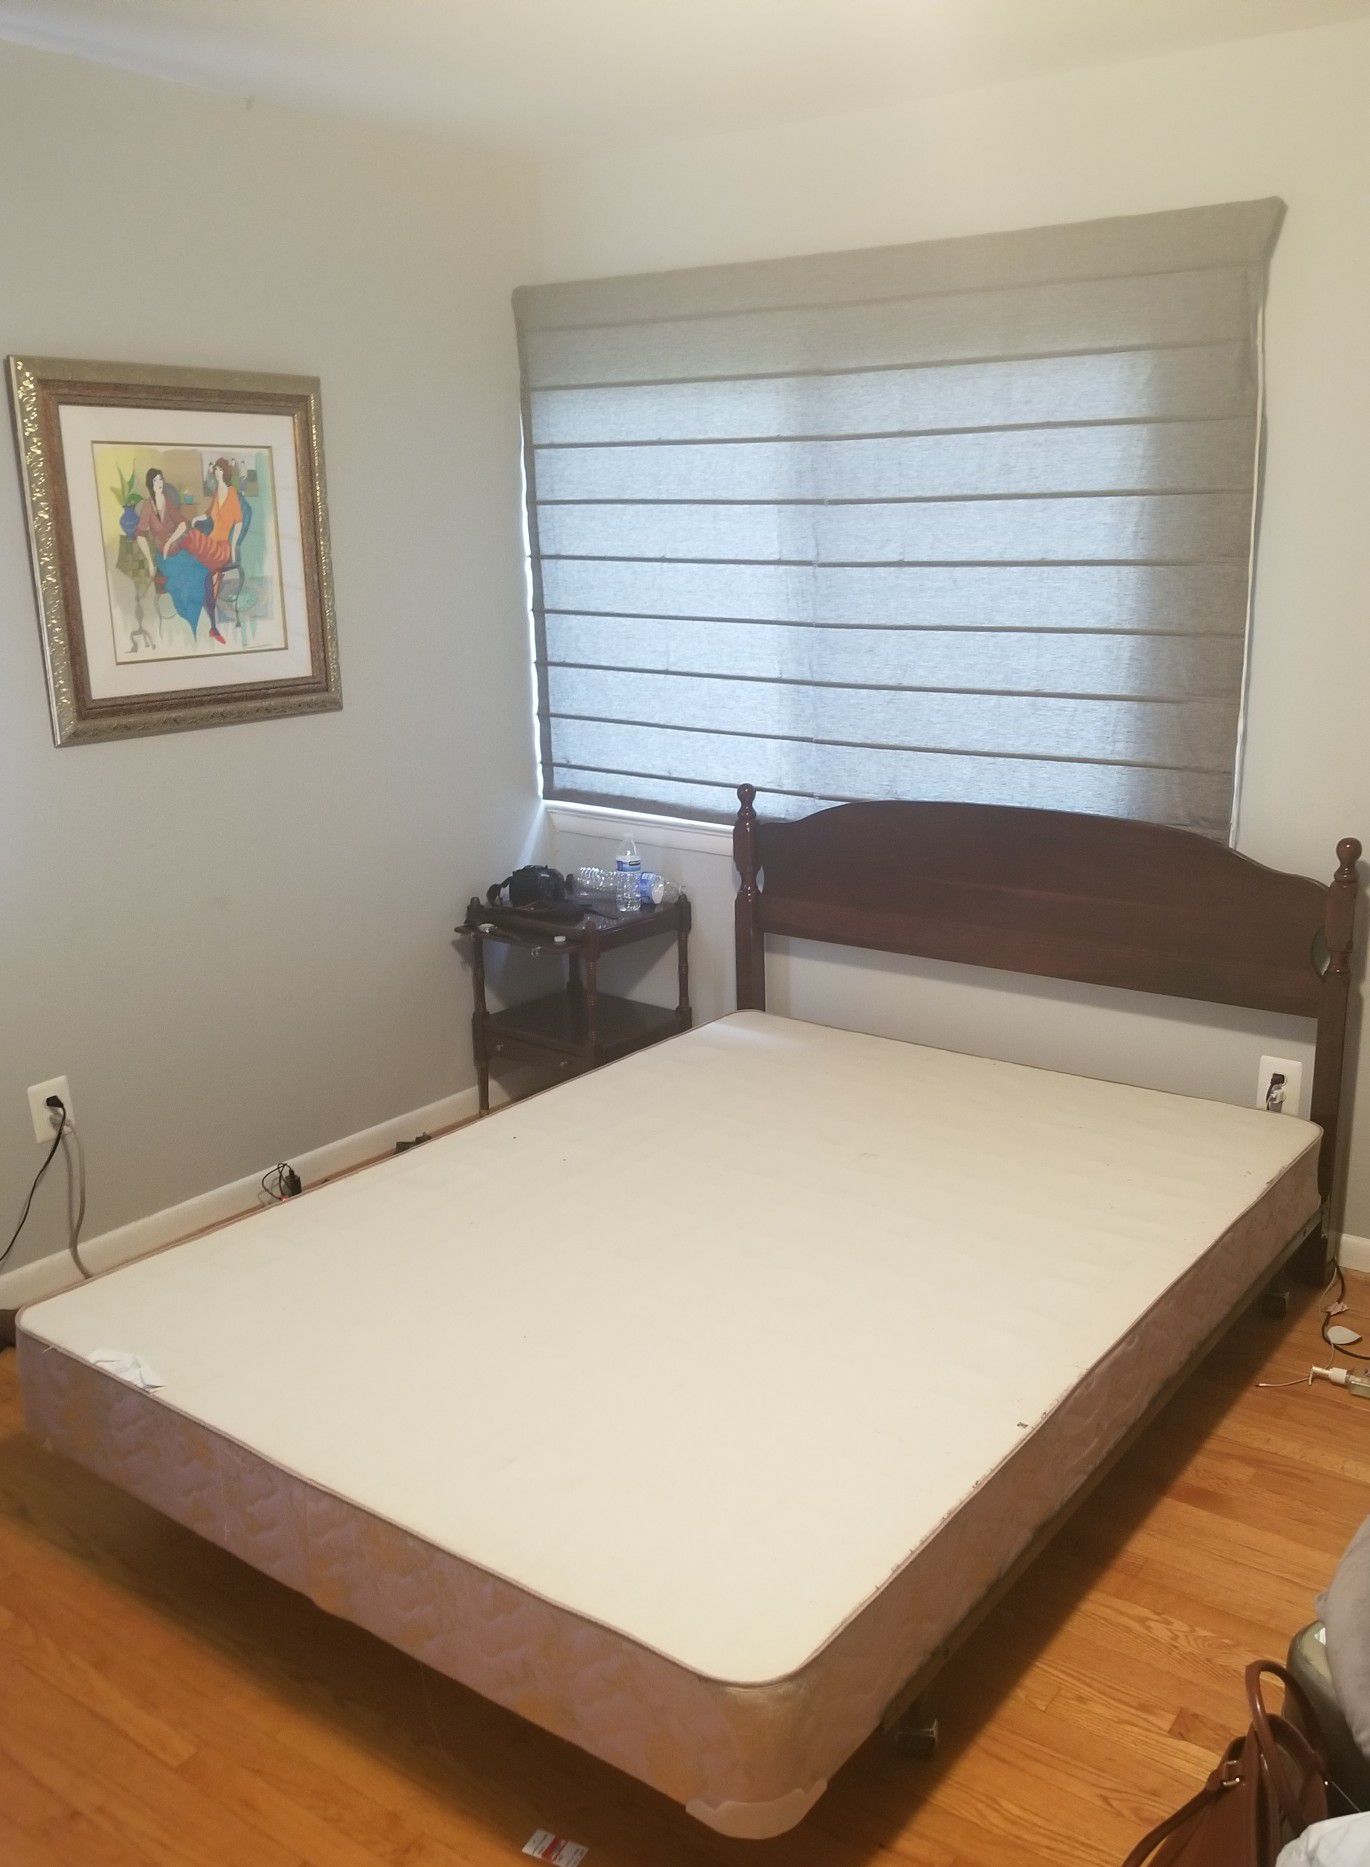 Bed with bed frame, mattress and box spring